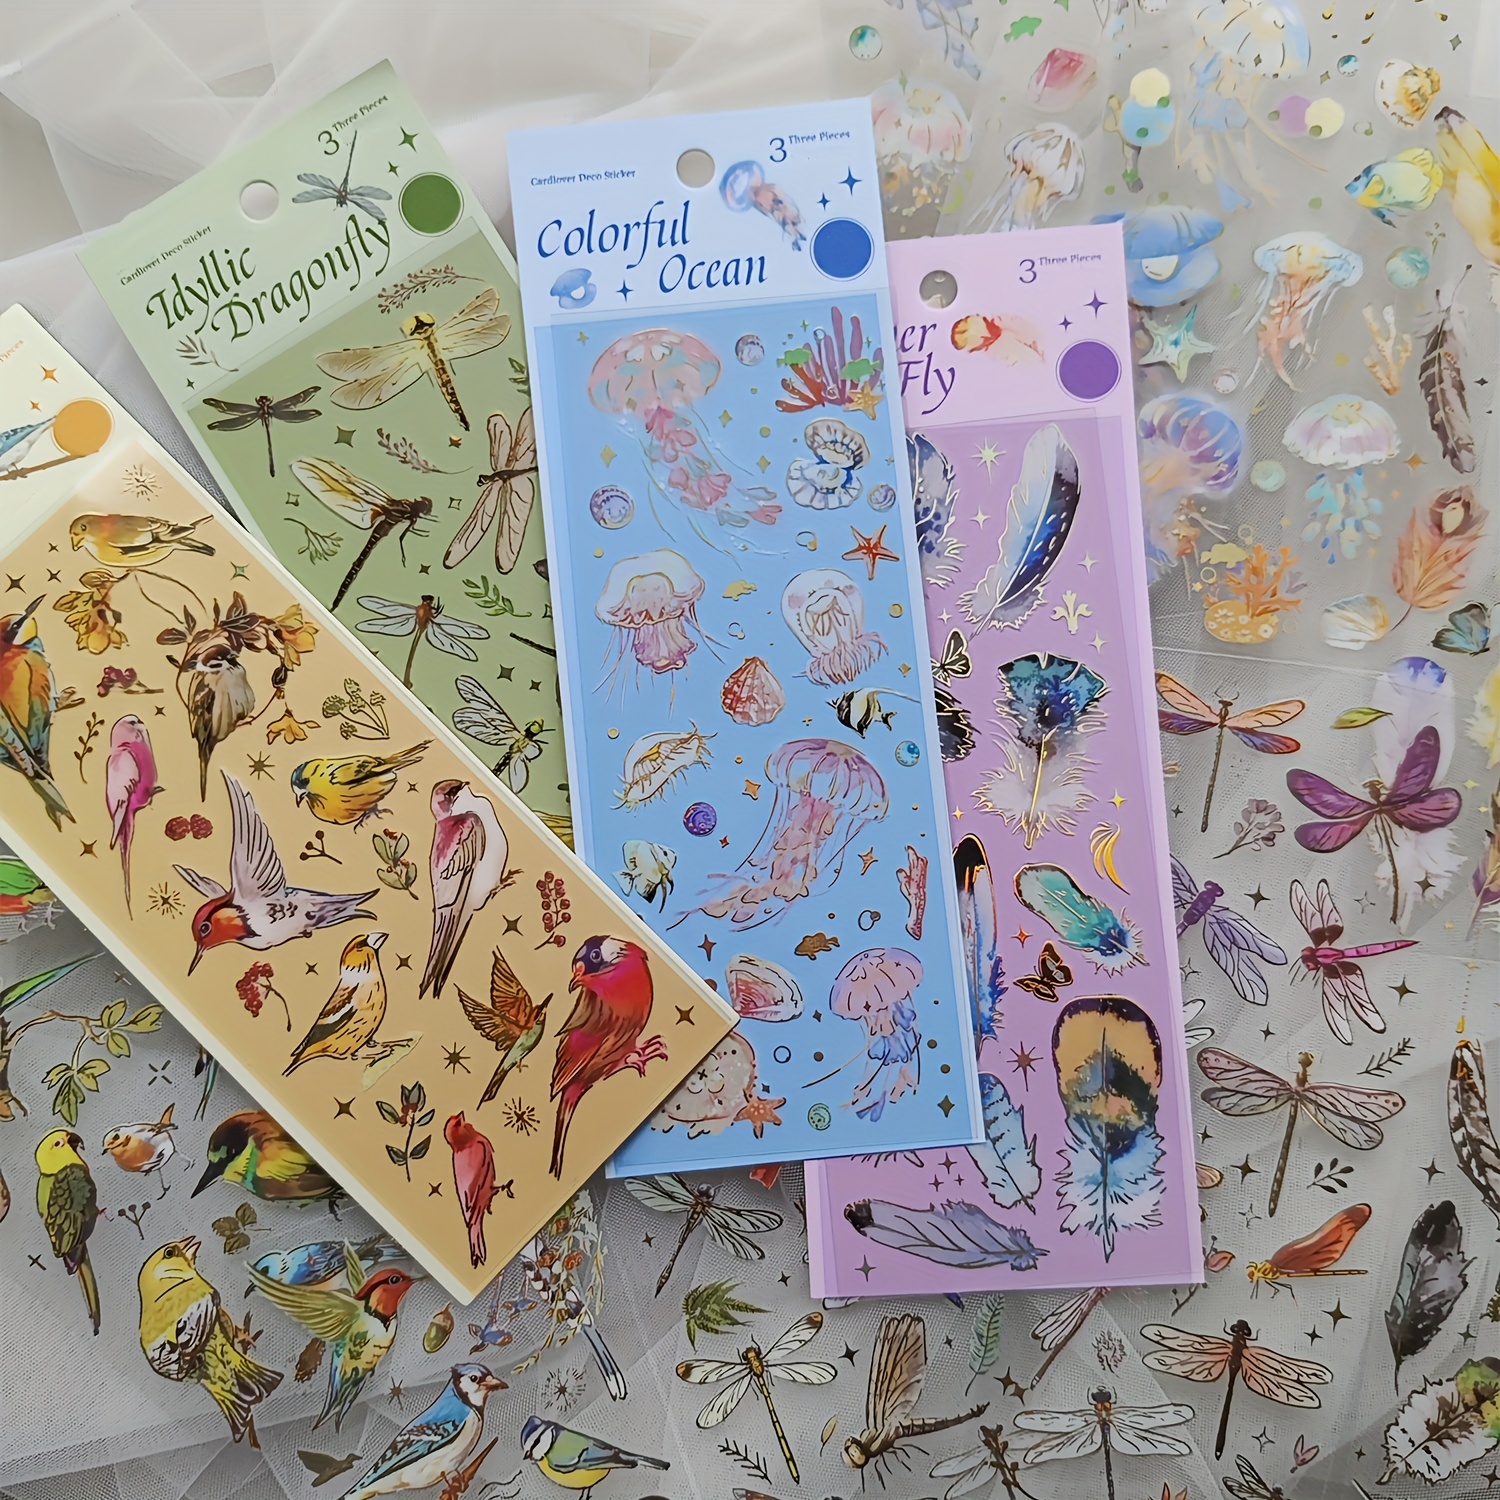 

3 Sheets/pack 3d Gilding Sticker Dragonfly Jellyfish Feather Notebook Decorative Stickers Pet Decorative Stickers For Scrapbooking Label Diary Stationery Album Telephone Journal Planner